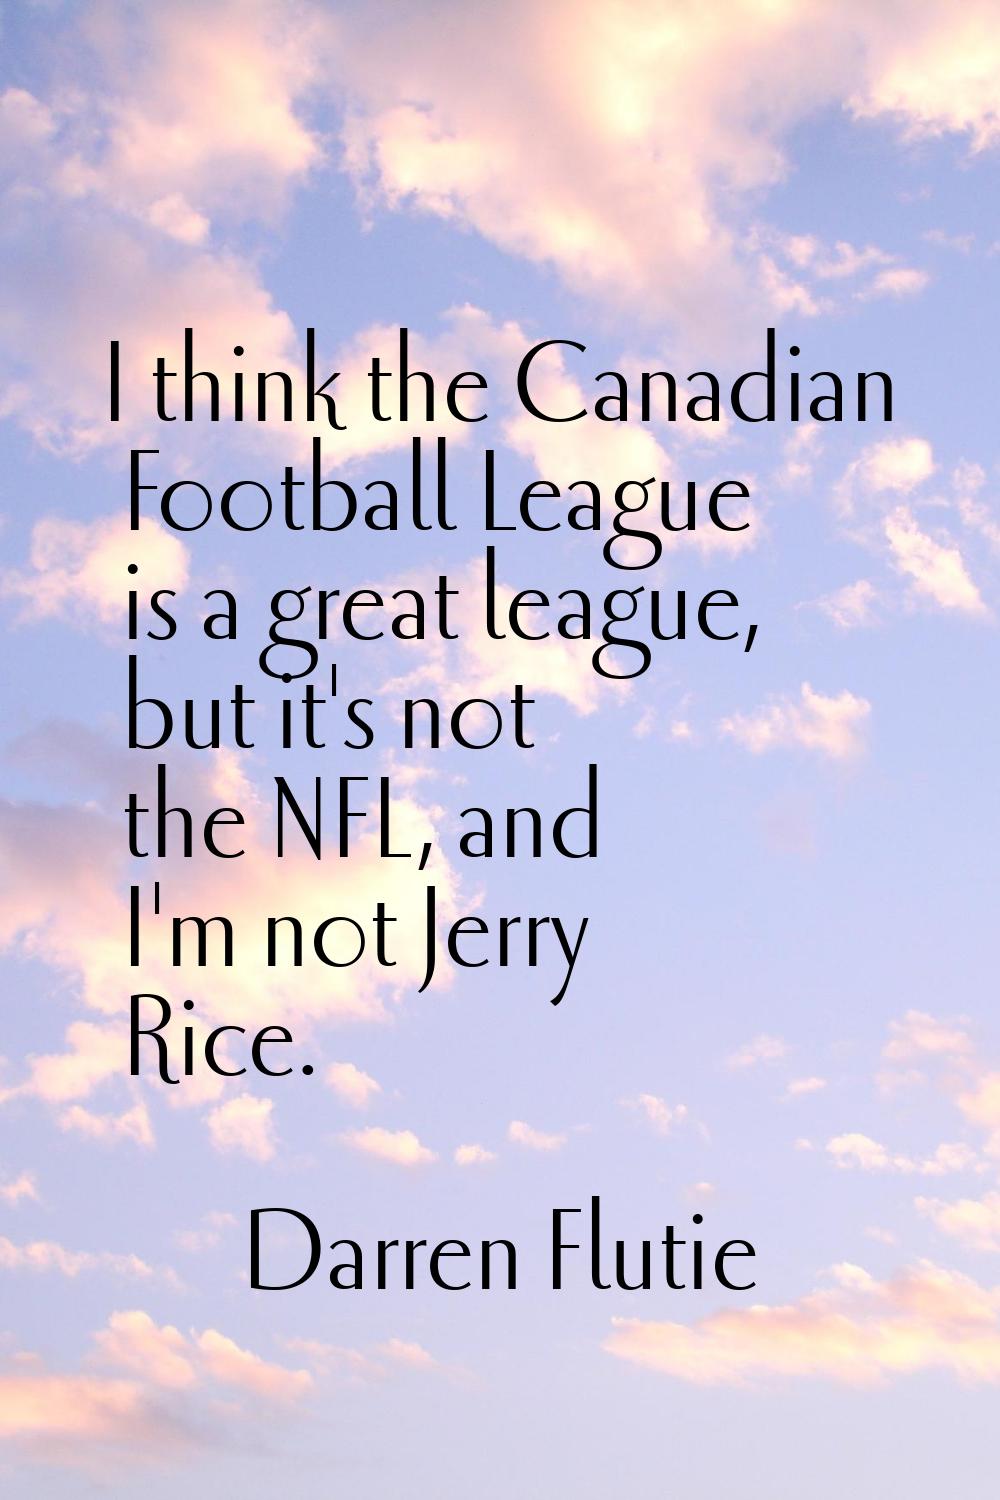 I think the Canadian Football League is a great league, but it's not the NFL, and I'm not Jerry Ric